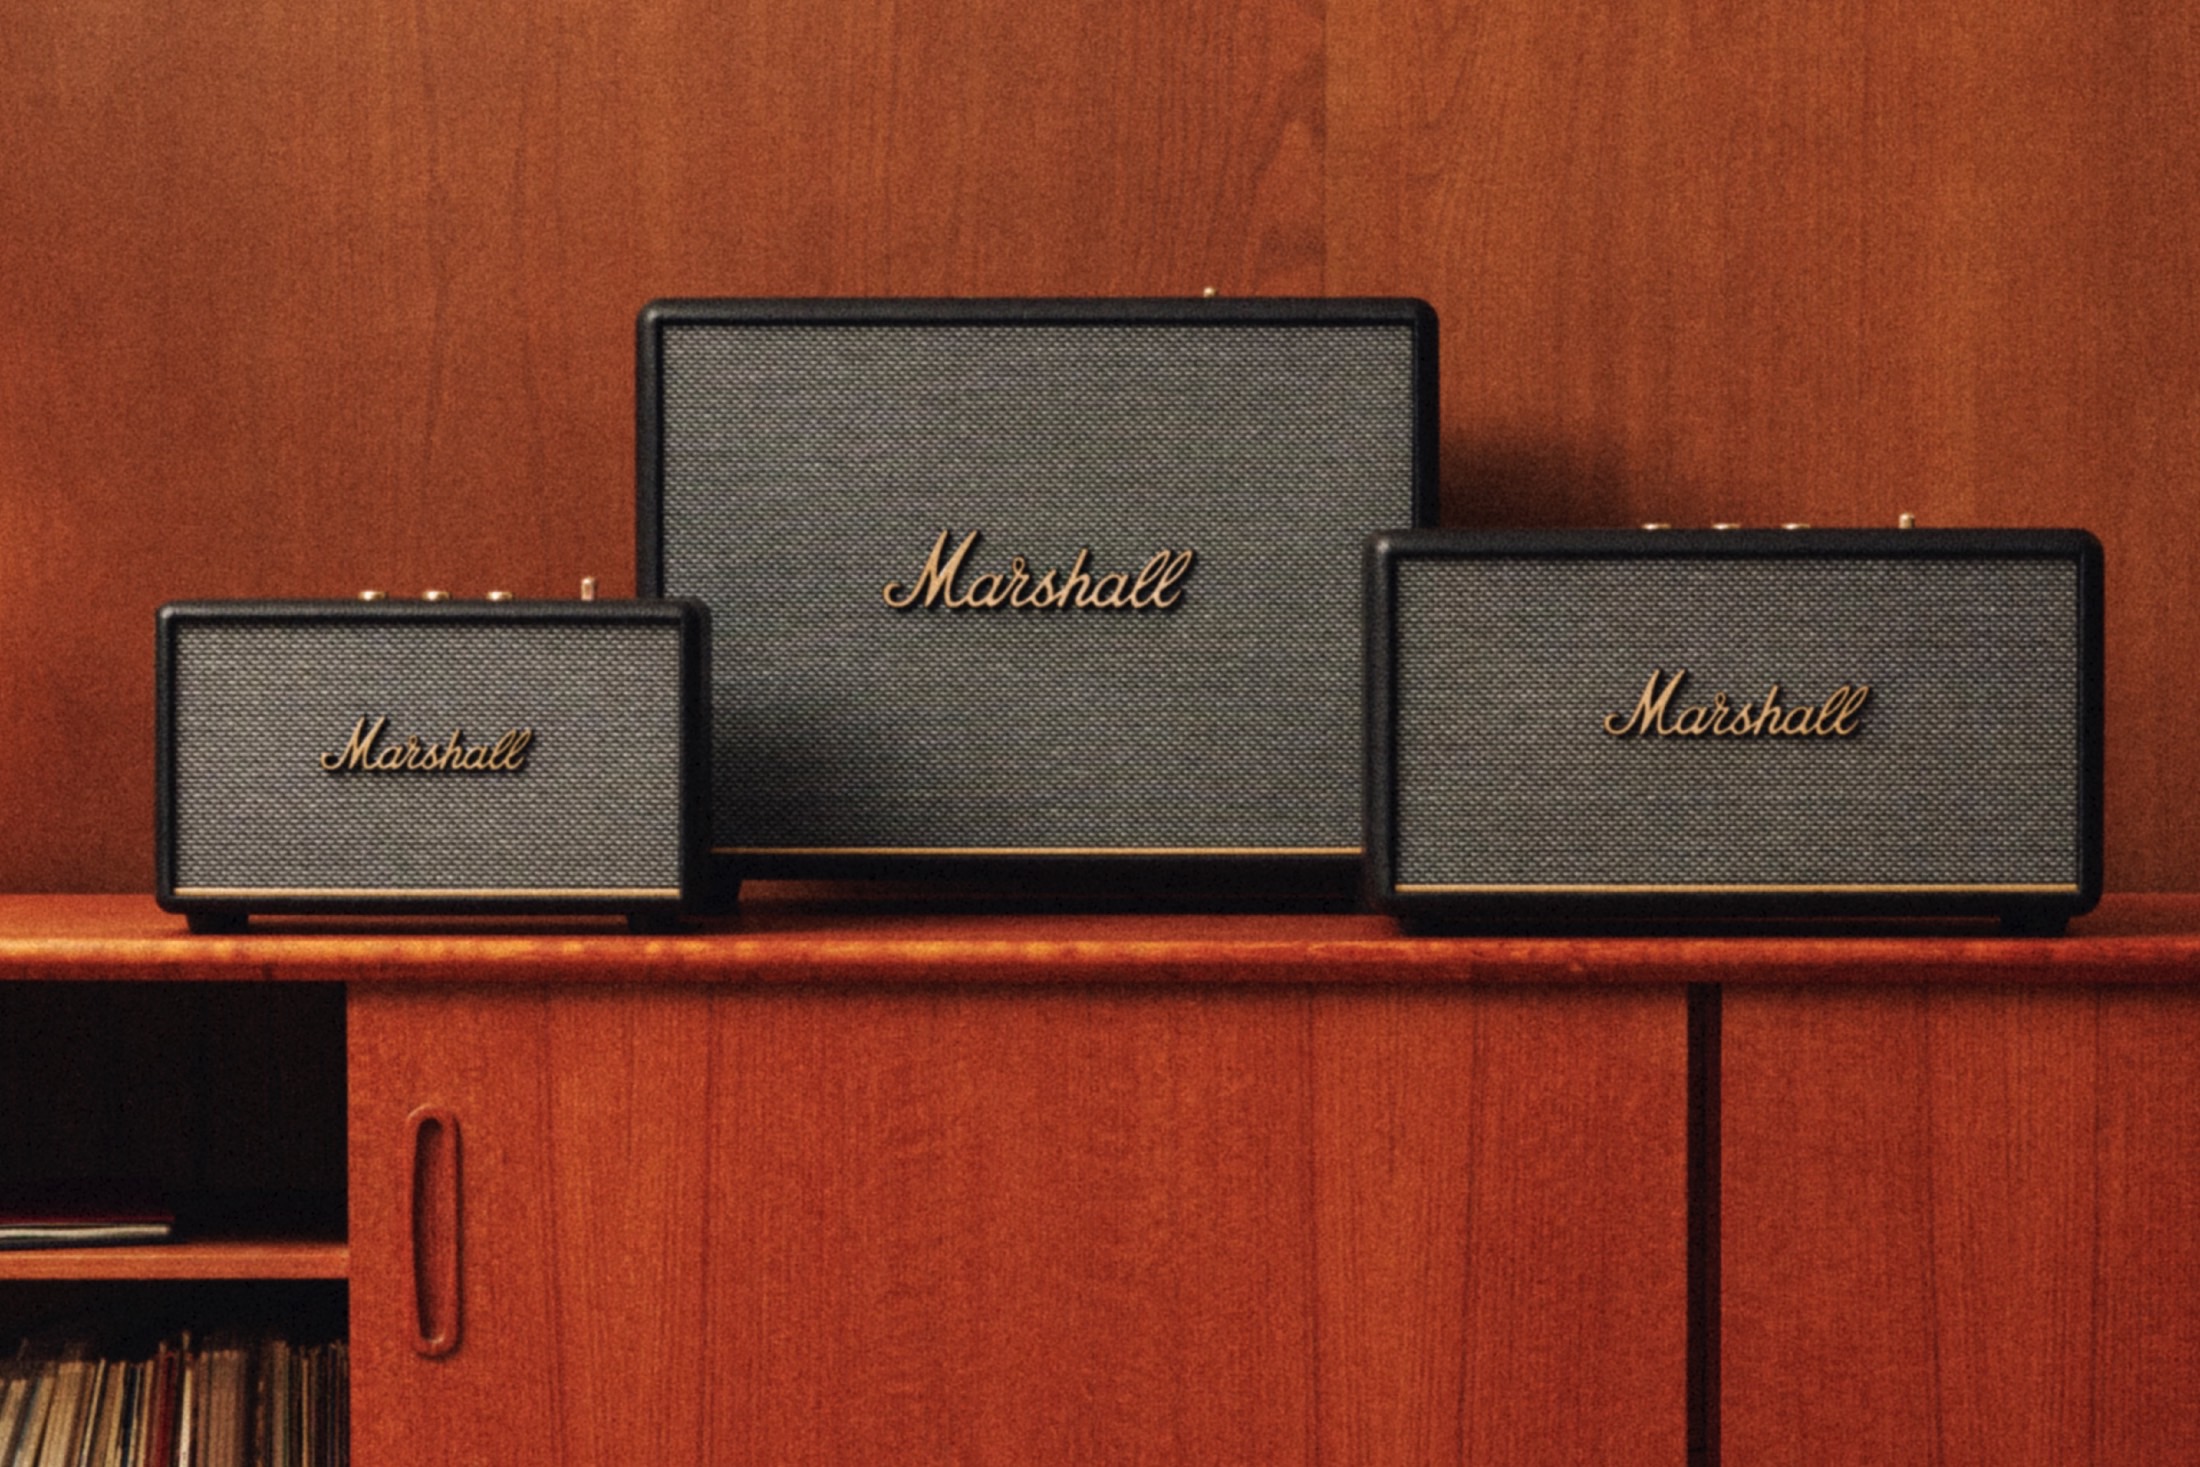 Marshall Acton III vs Stanmore III: Which is better?